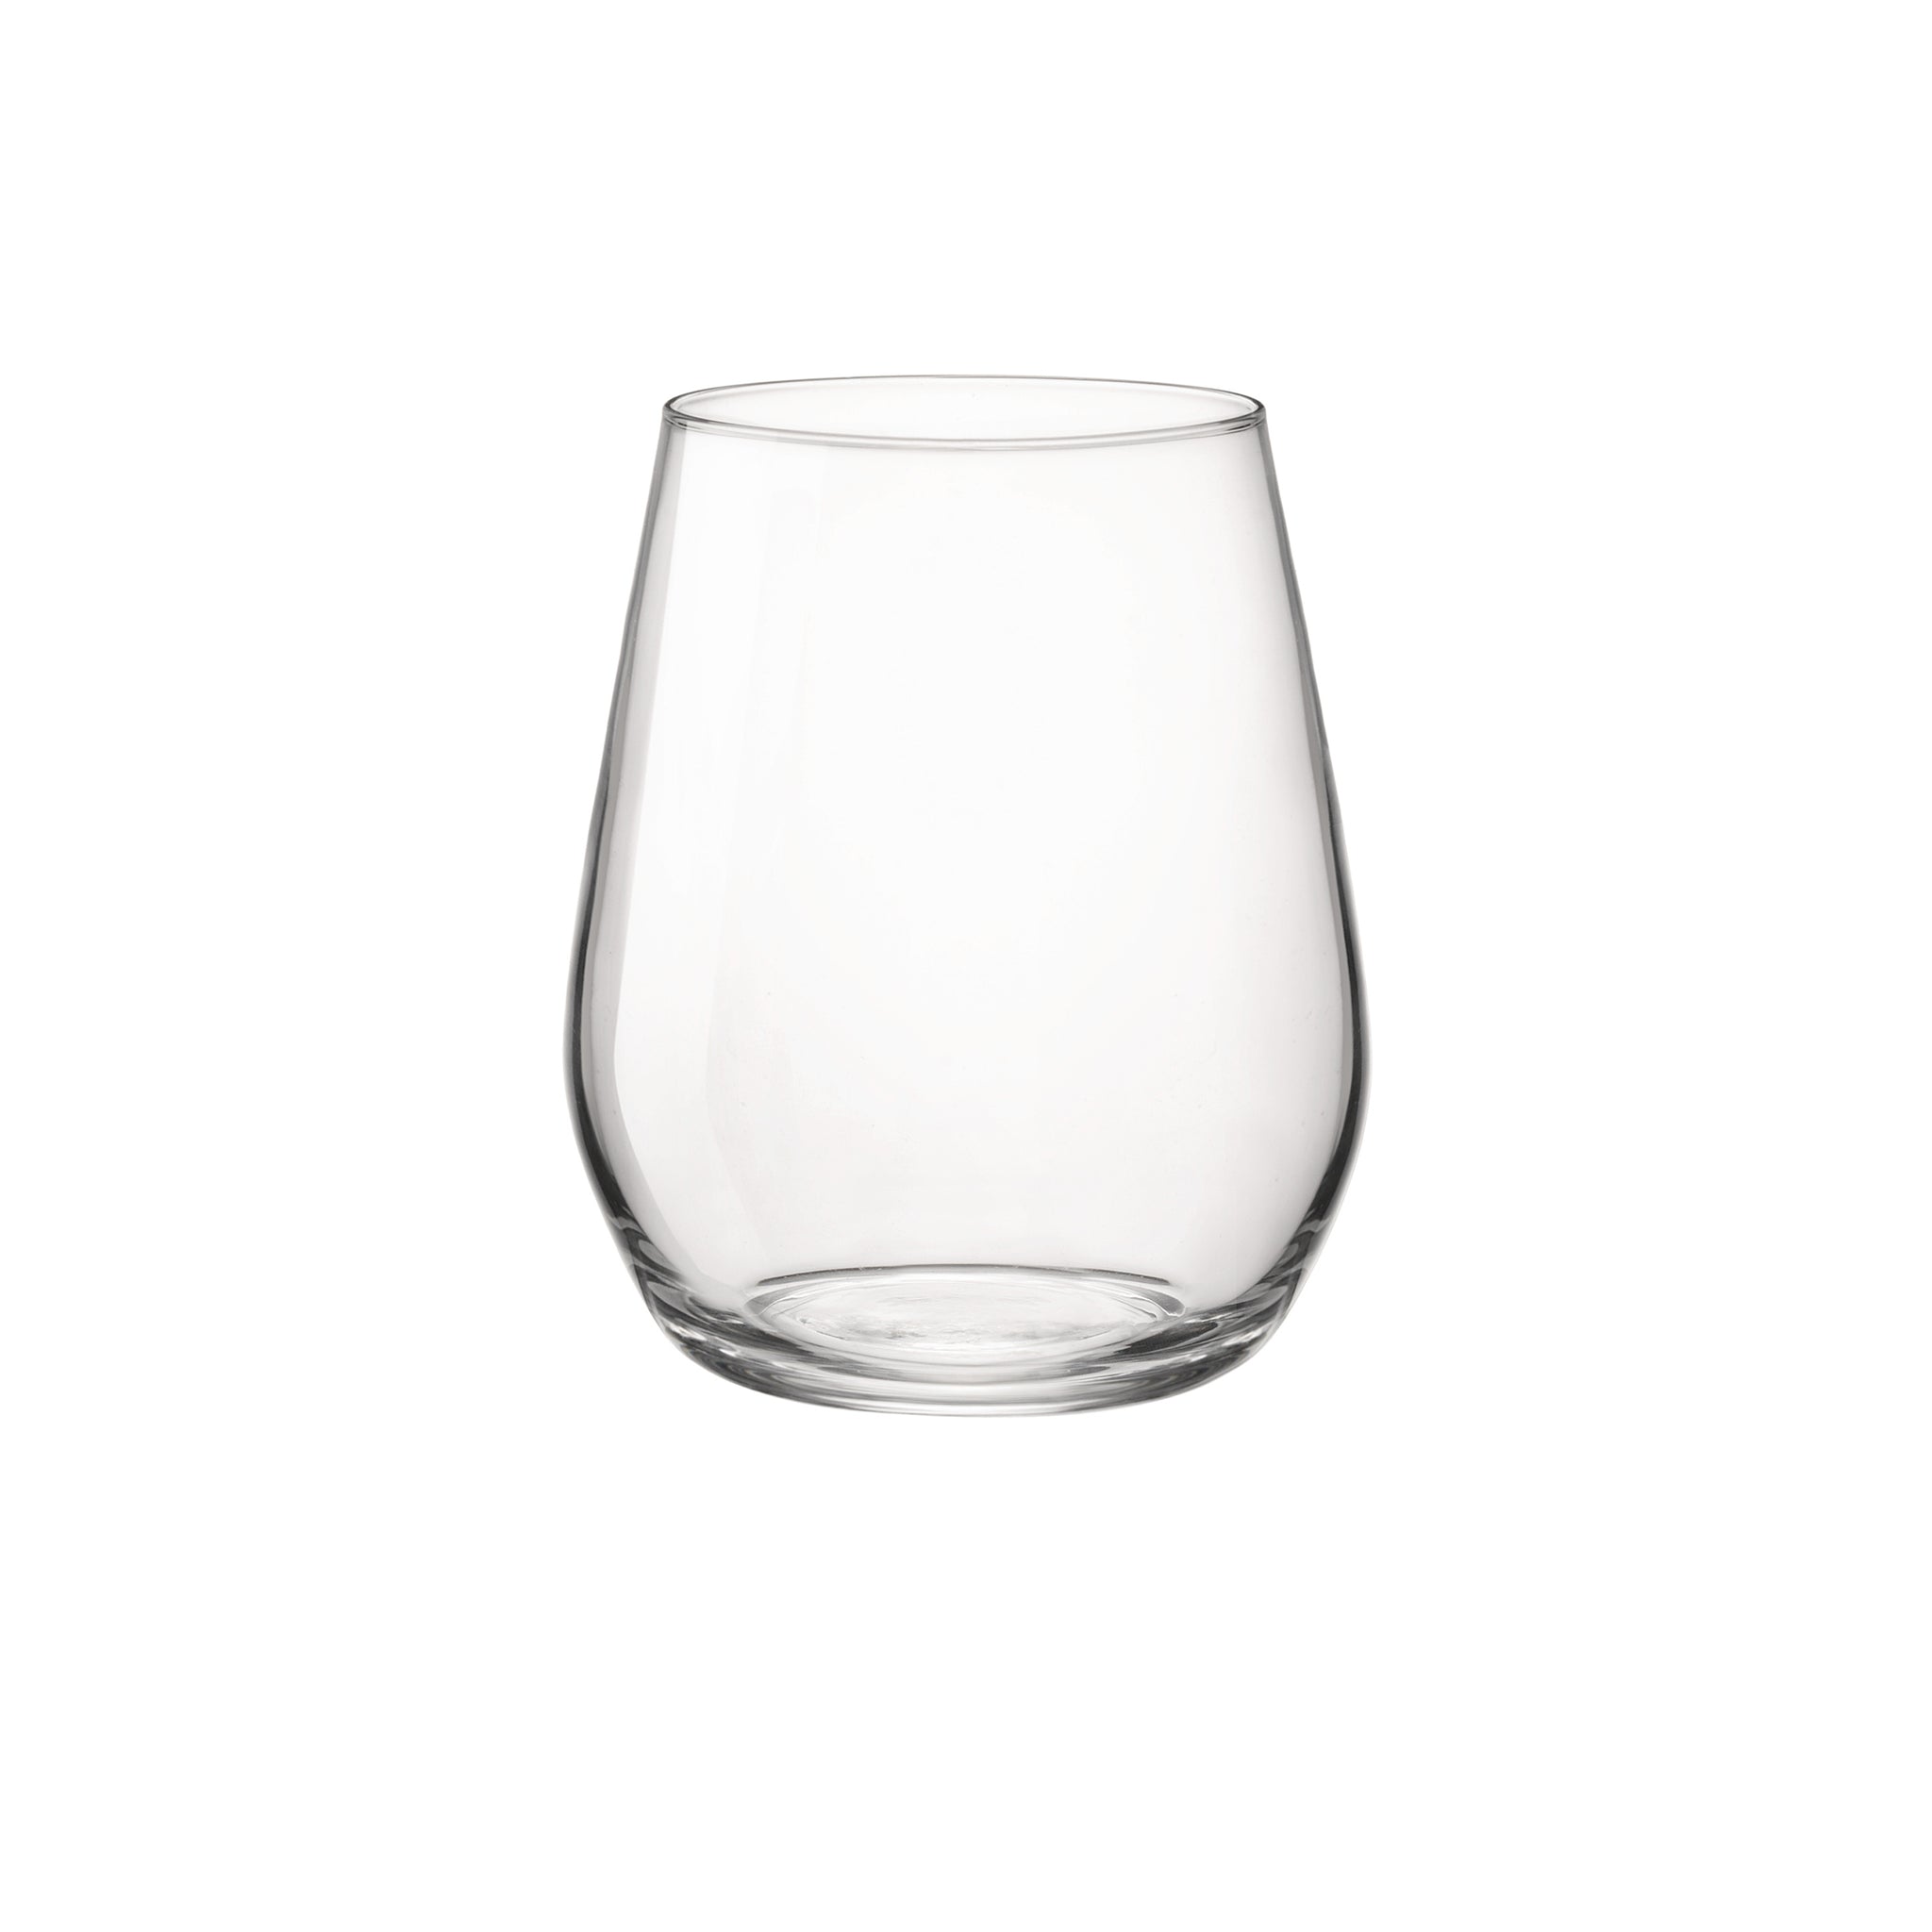 Electra 12.75 oz. Stemless Wine or DOF Drinking Glasses (Set of 6)